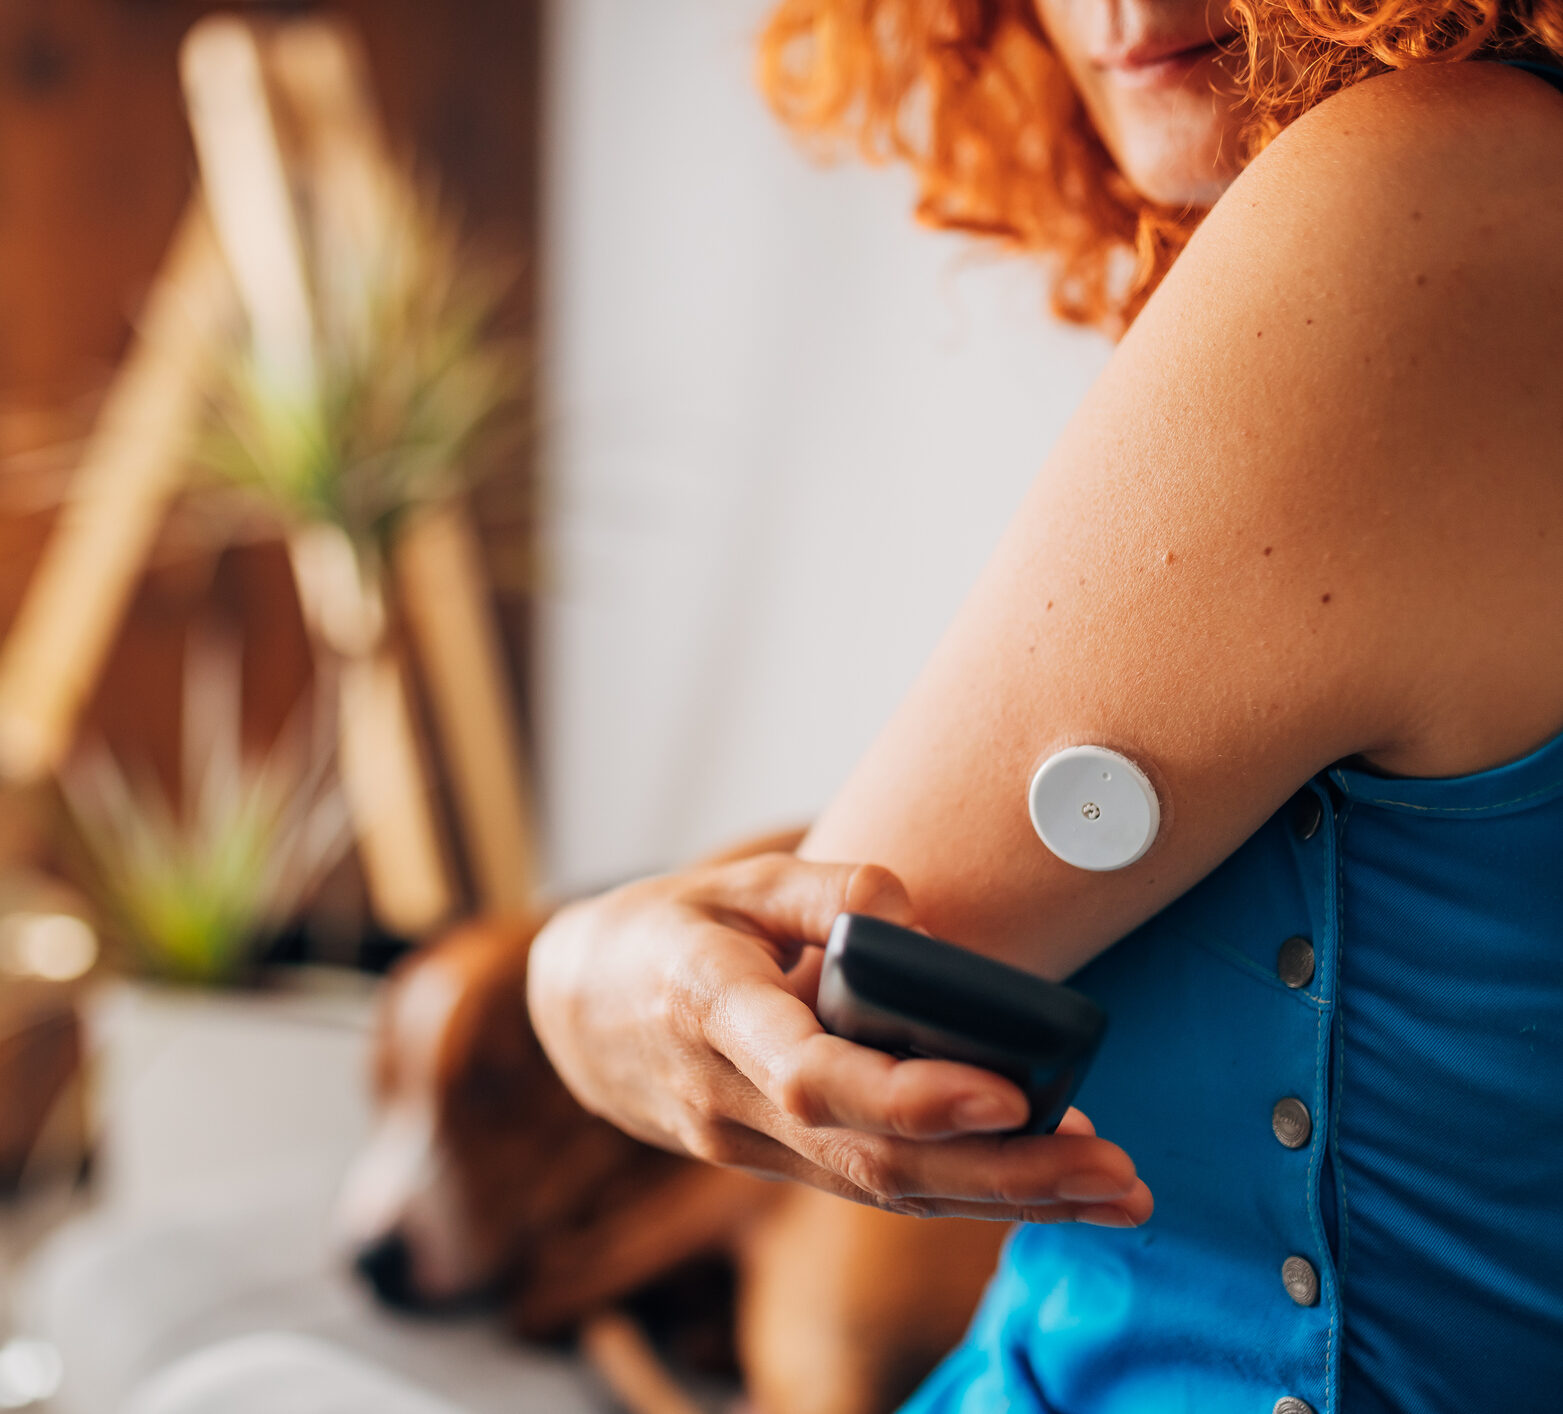 Woman with type 1 diabetes using the continuous glucose monitor reader device, above the glucose blood sensor to scan her blood sugar level